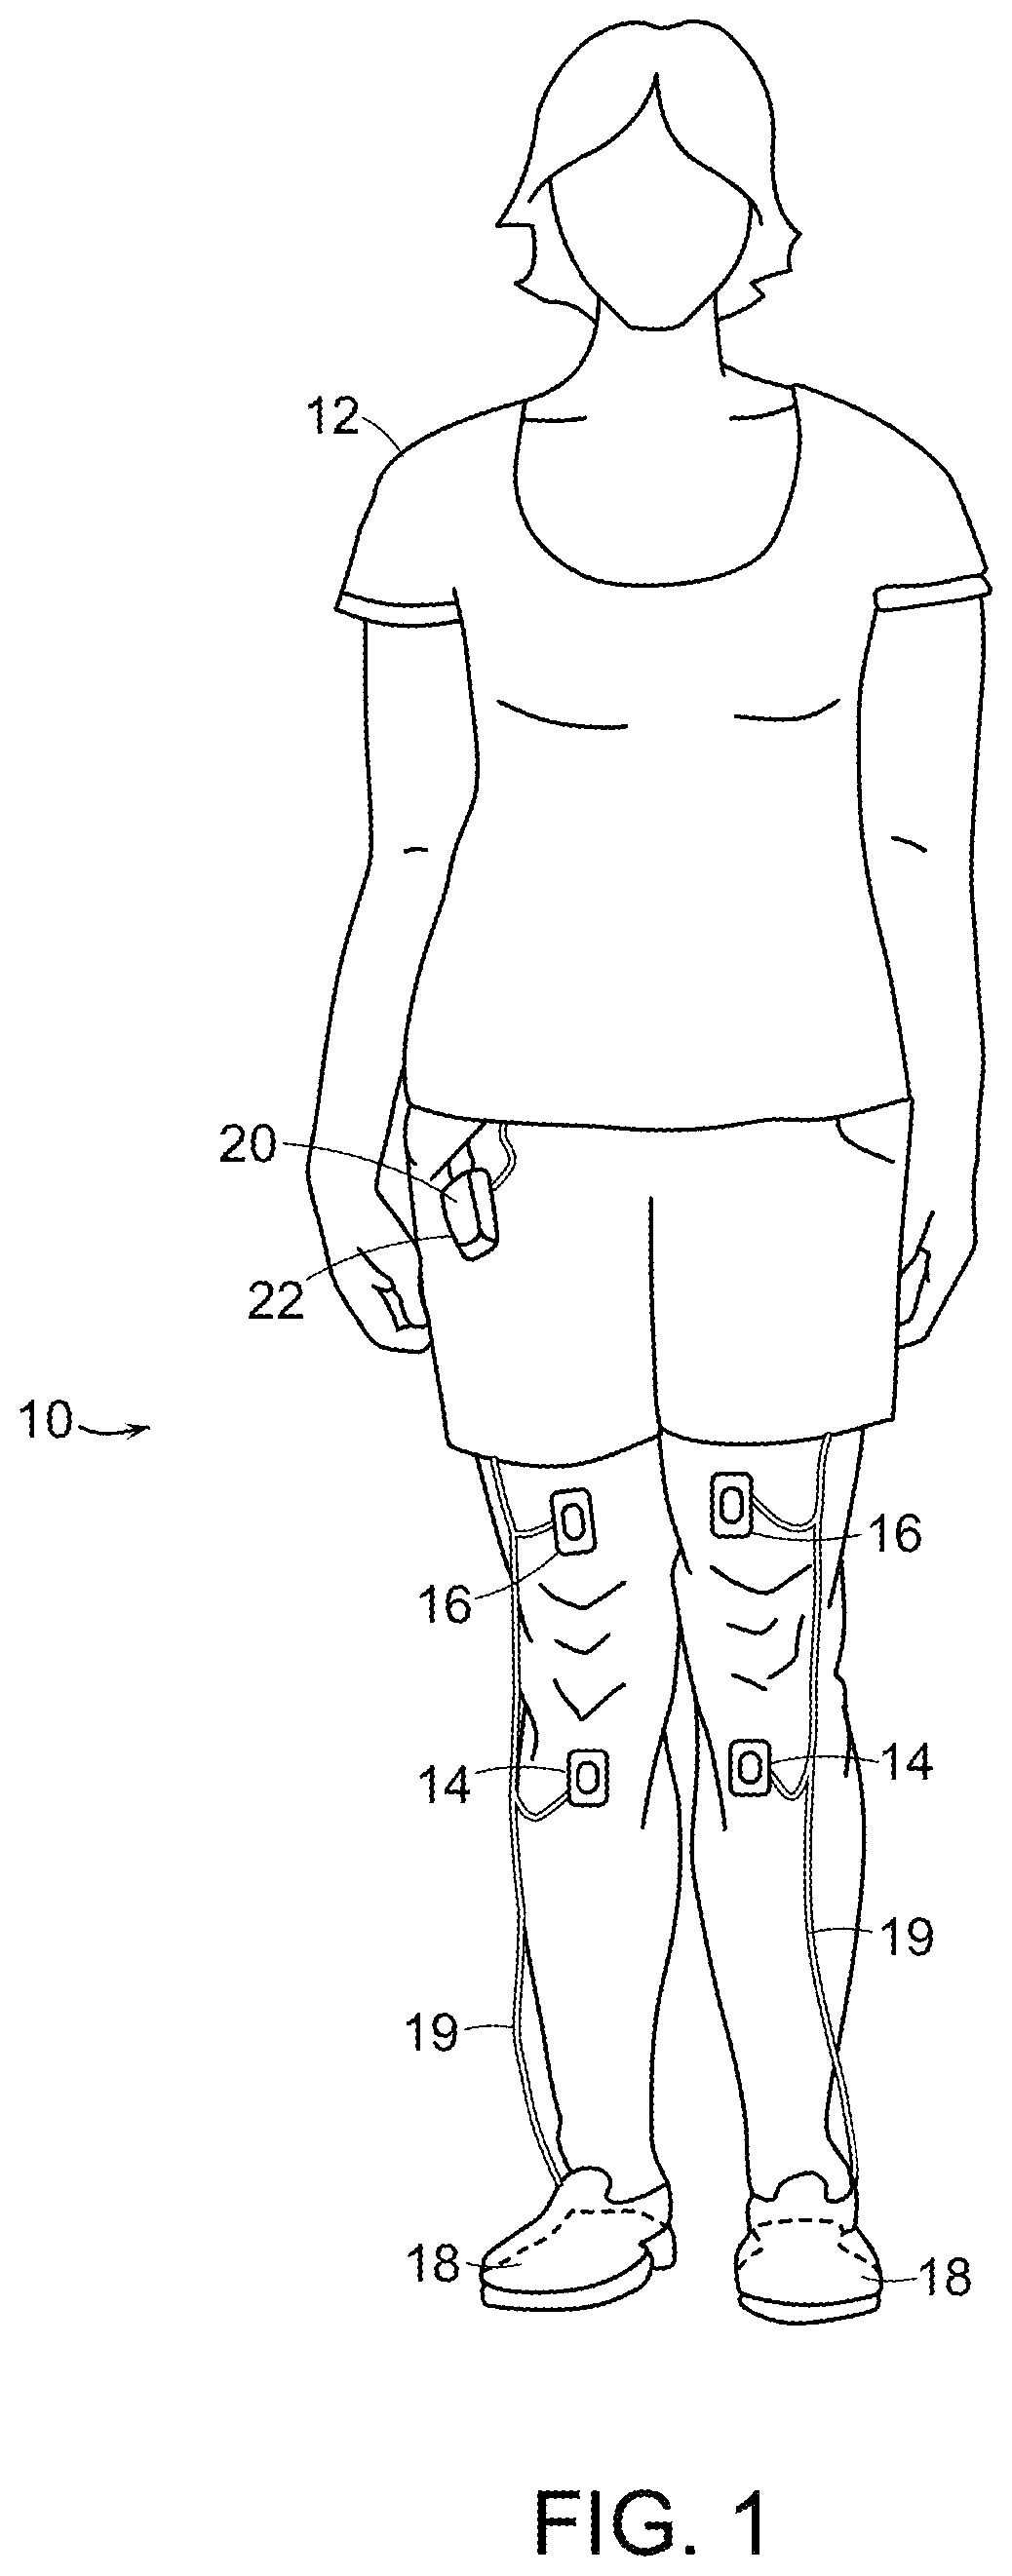 Feedback method and wearable device to monitor and modulate knee adduction moment